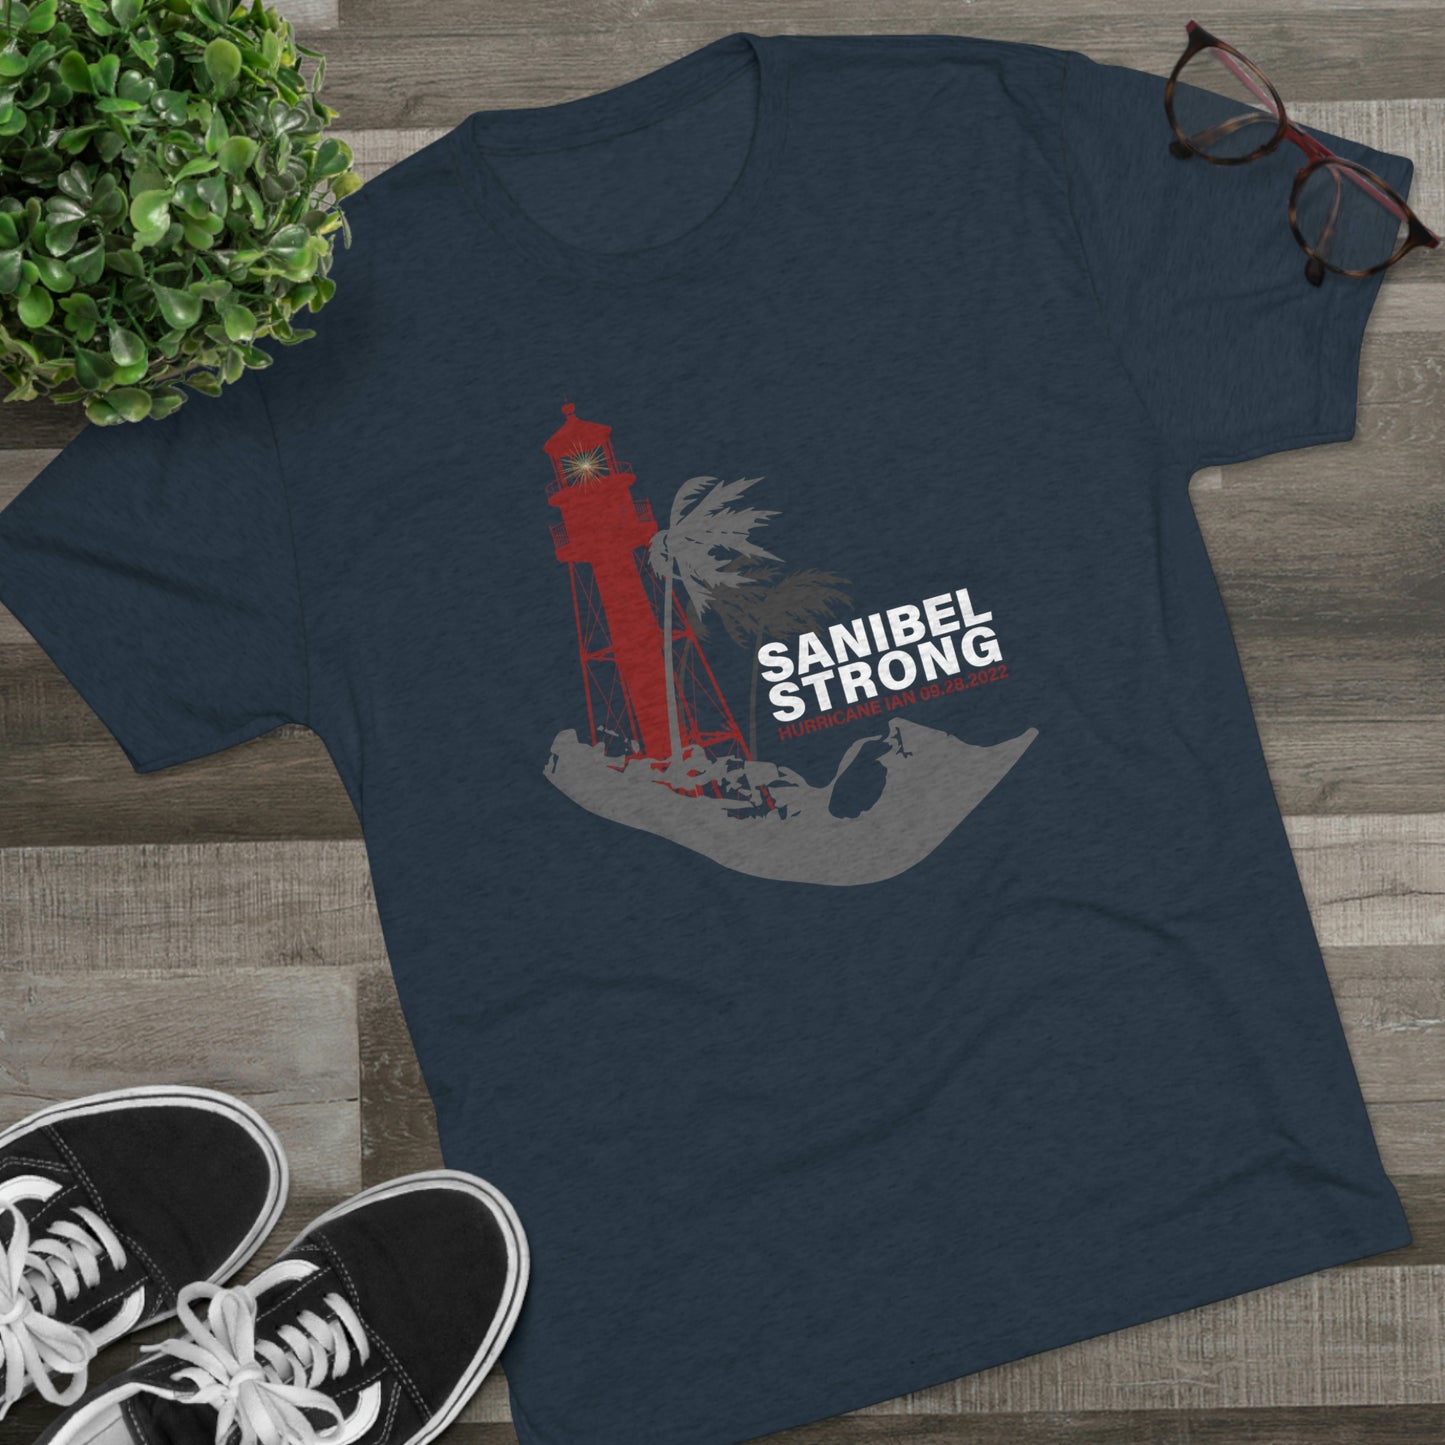 Sanibel Strong Lighthouse Unisex Tri-Blend Crew Tee + More Colors